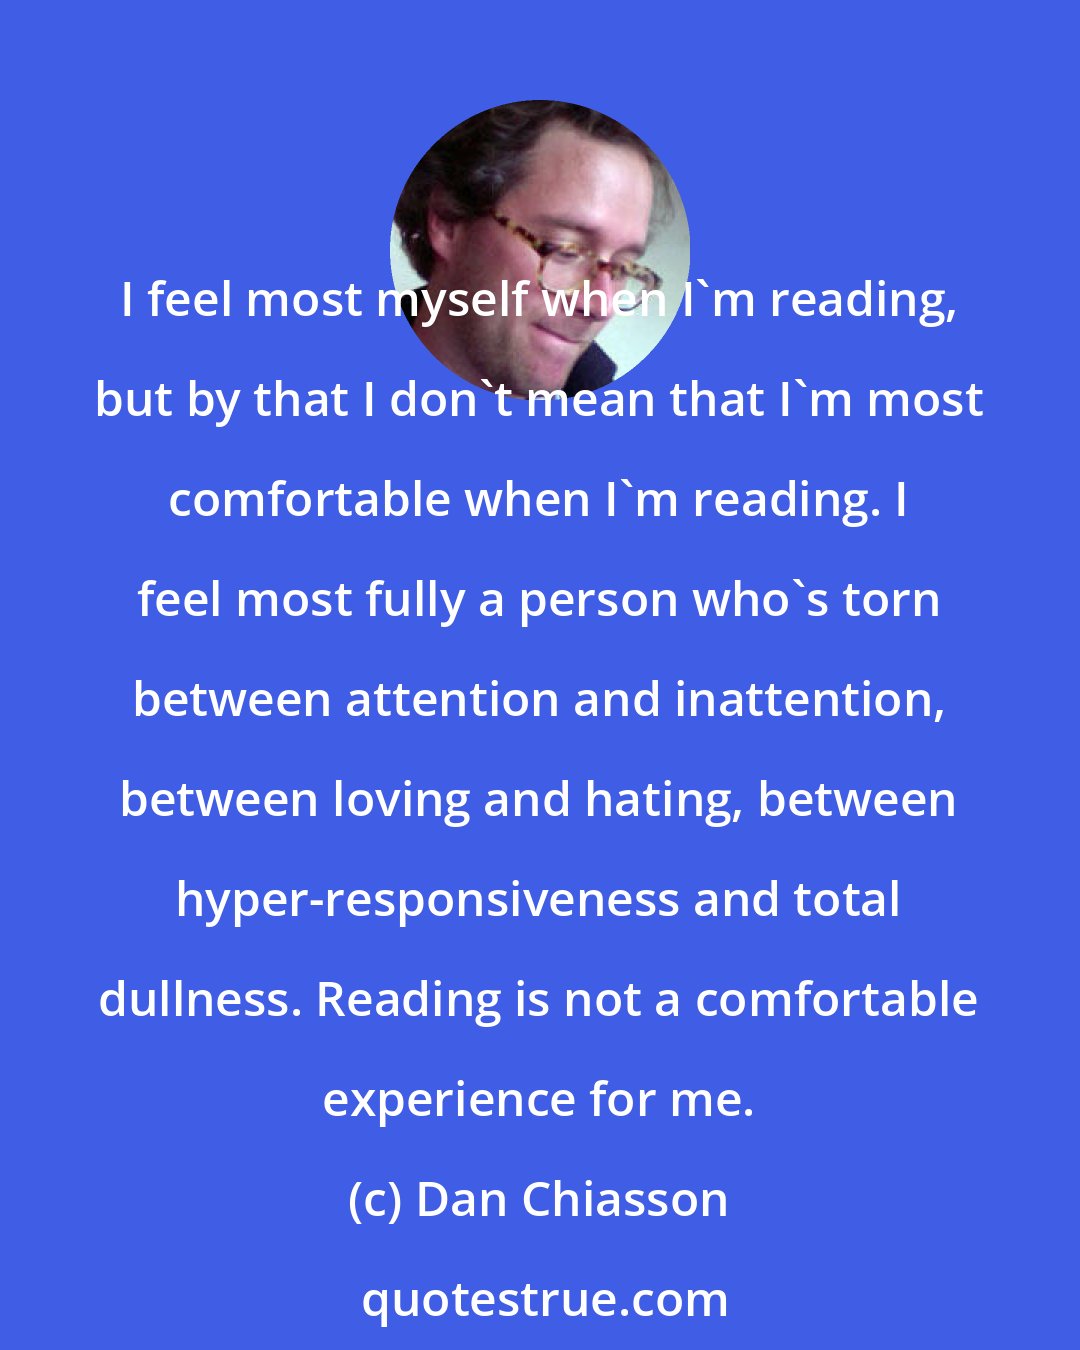 Dan Chiasson: I feel most myself when I'm reading, but by that I don't mean that I'm most comfortable when I'm reading. I feel most fully a person who's torn between attention and inattention, between loving and hating, between hyper-responsiveness and total dullness. Reading is not a comfortable experience for me.